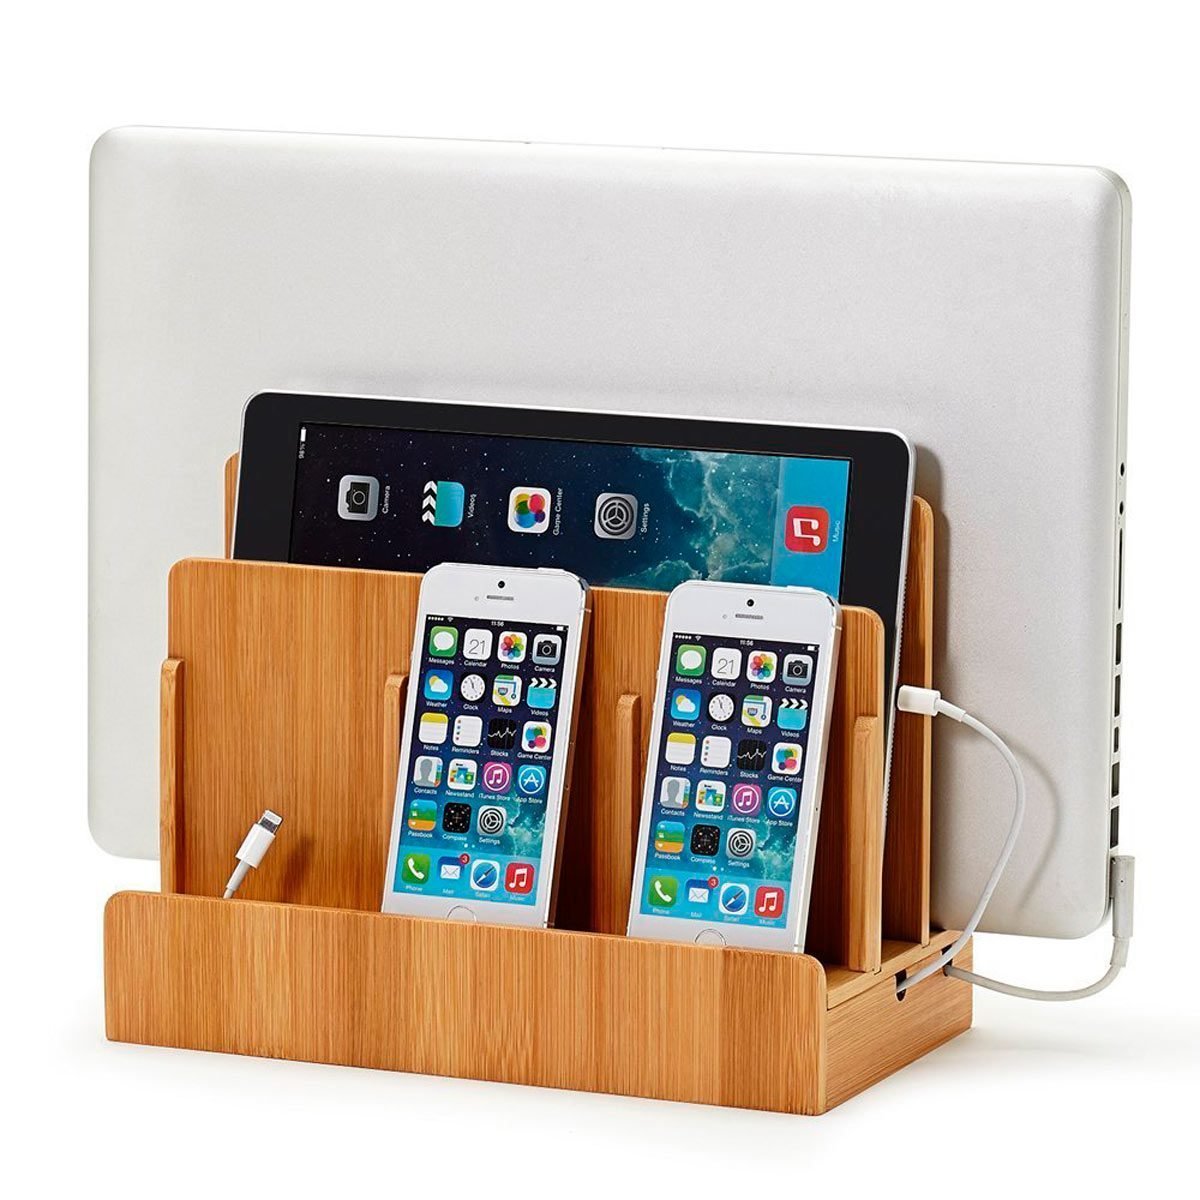 10 Storage and Organization Ideas For All of Your Devices